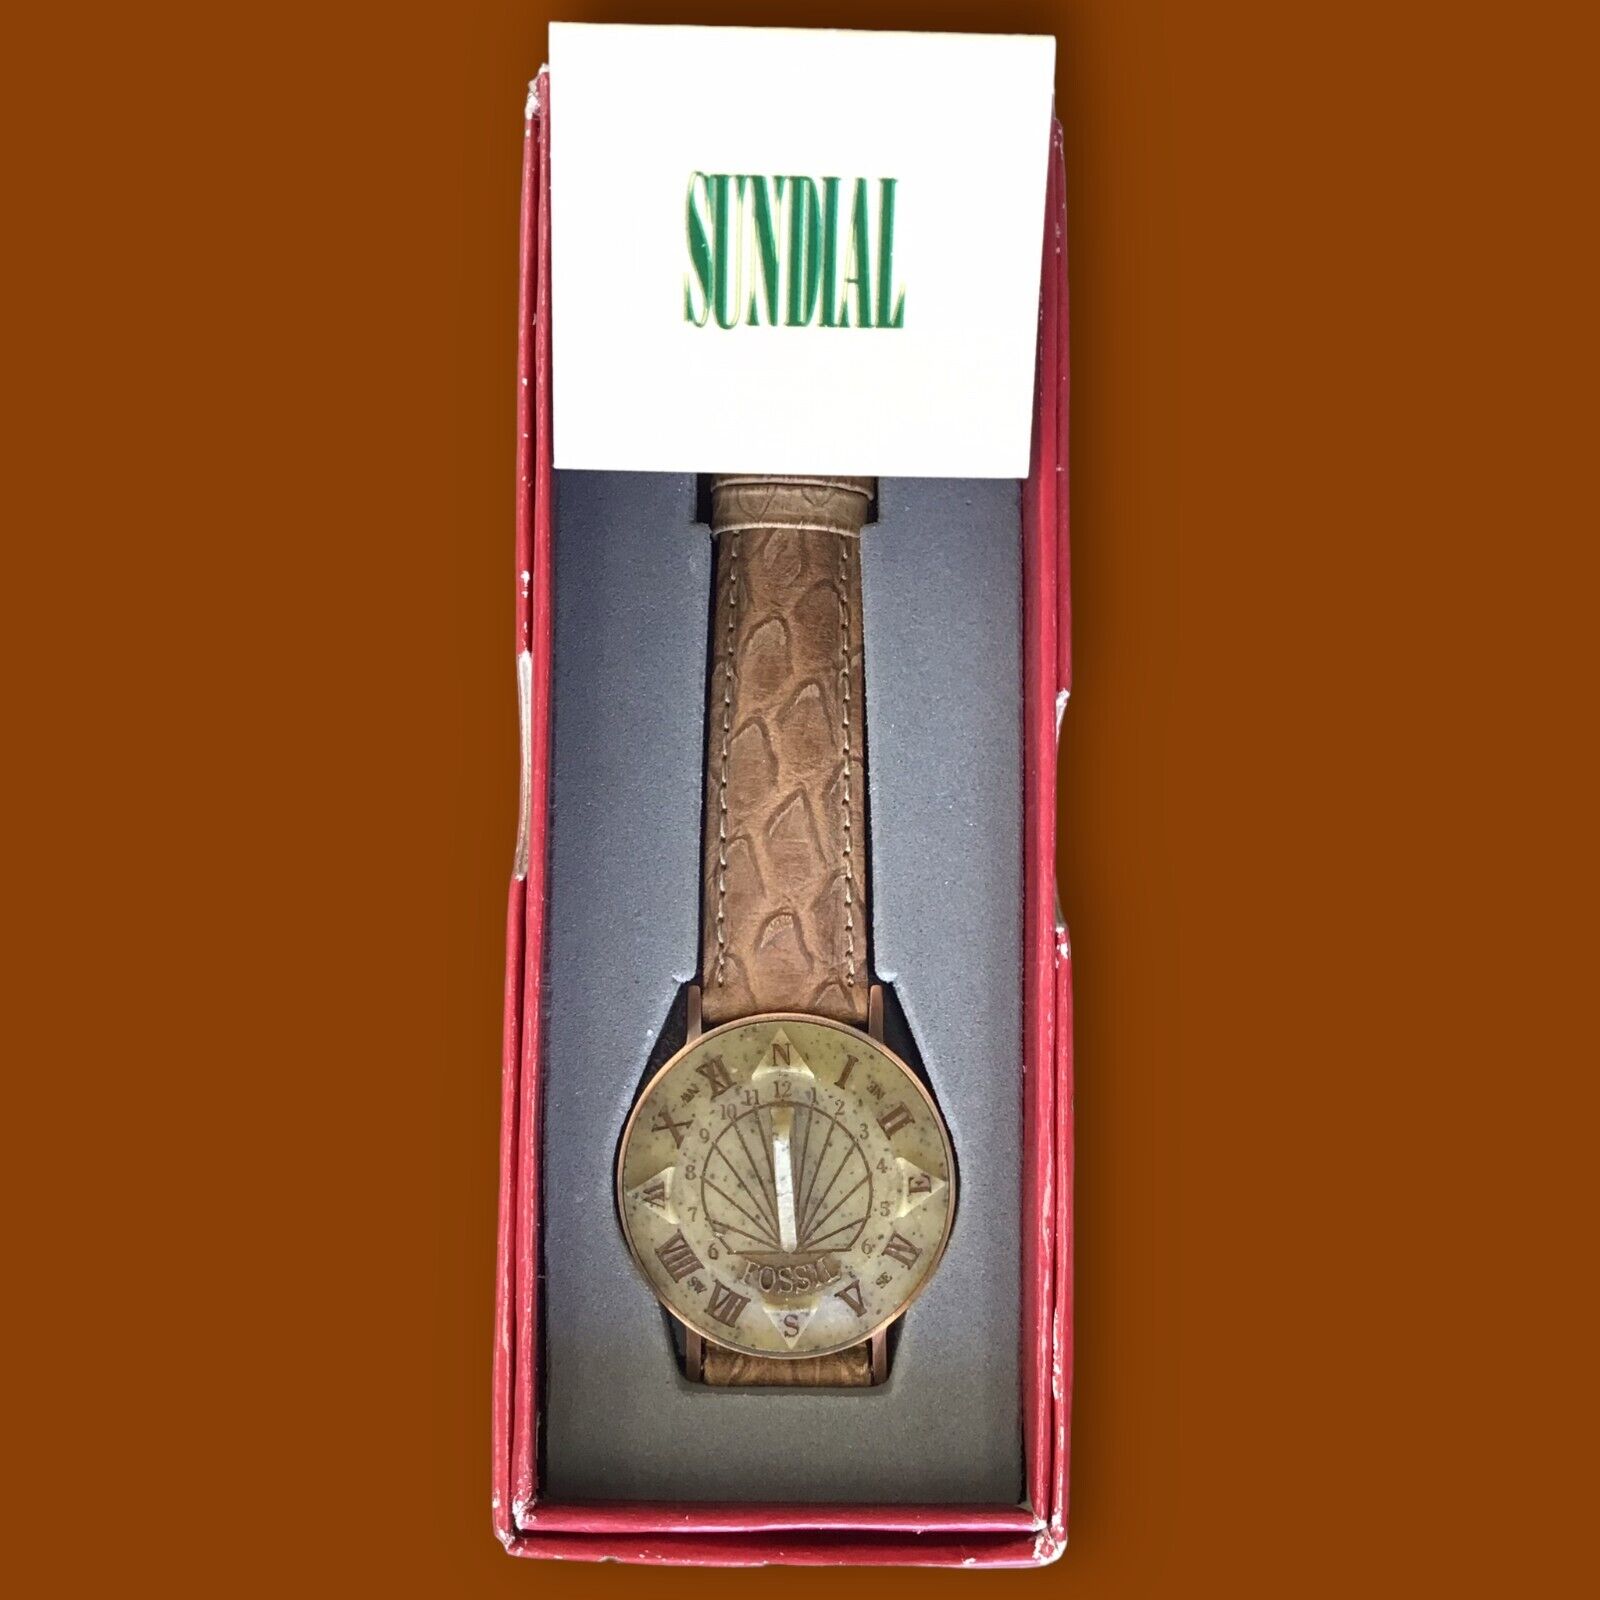 Classic stone sundial watch with intricate mechanical gears on Craiyon